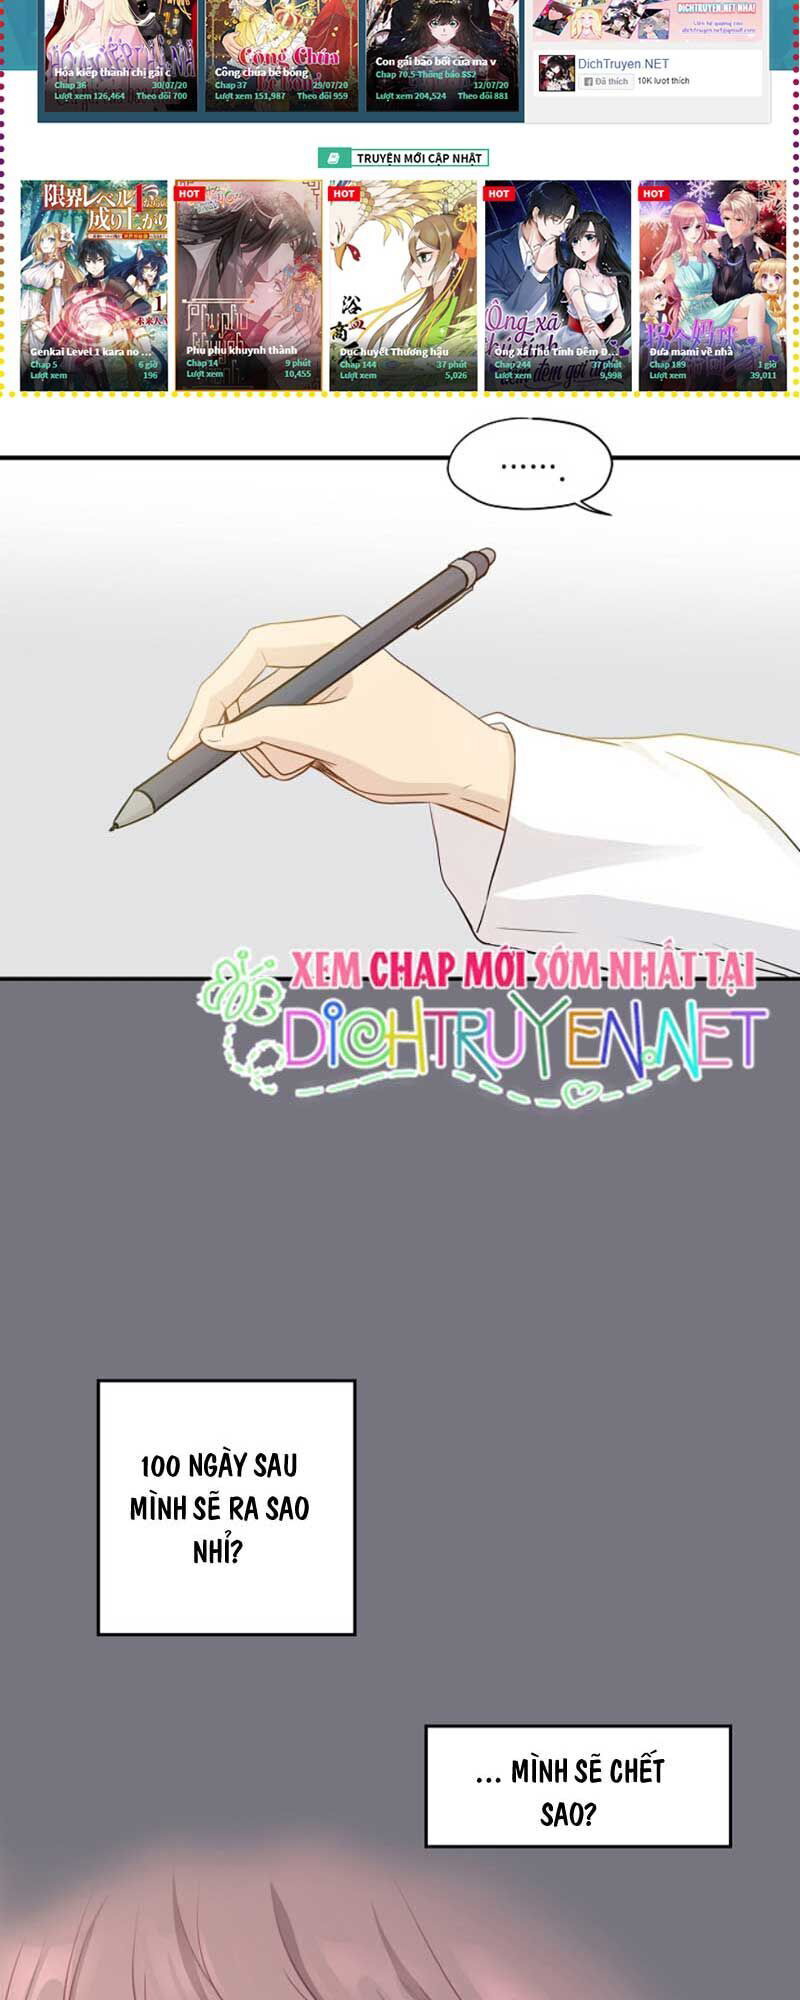 cuoc-song-ky-thu-chap-3-28